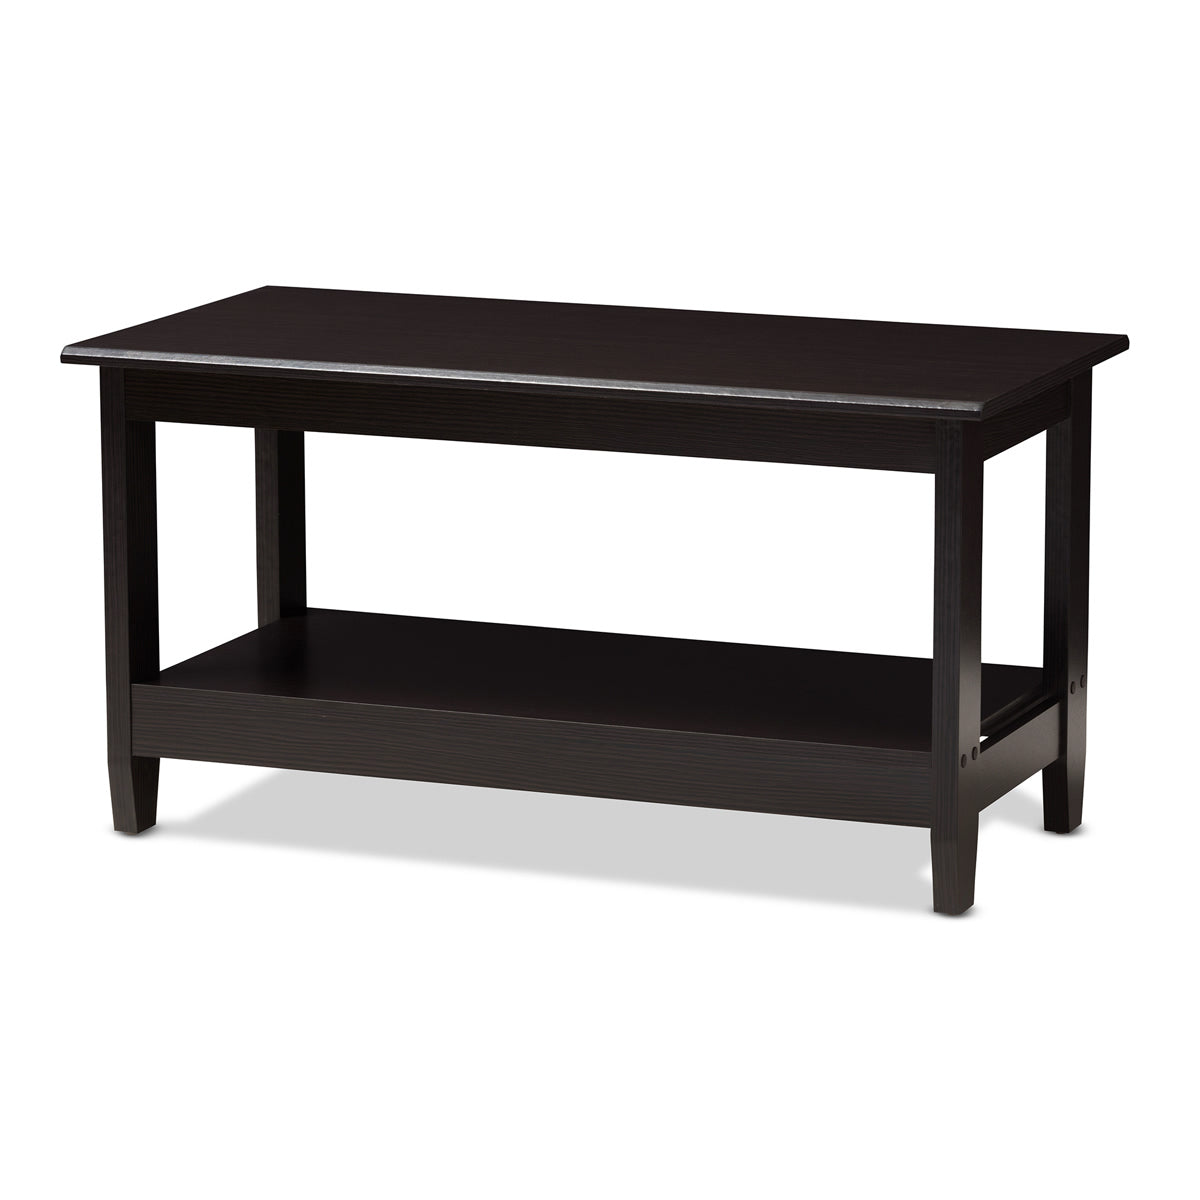 Baxton Studio Malena Modern and Contemporary Wenge Brown Finished Coffee Table Baxton Studio-coffee tables-Minimal And Modern - 1